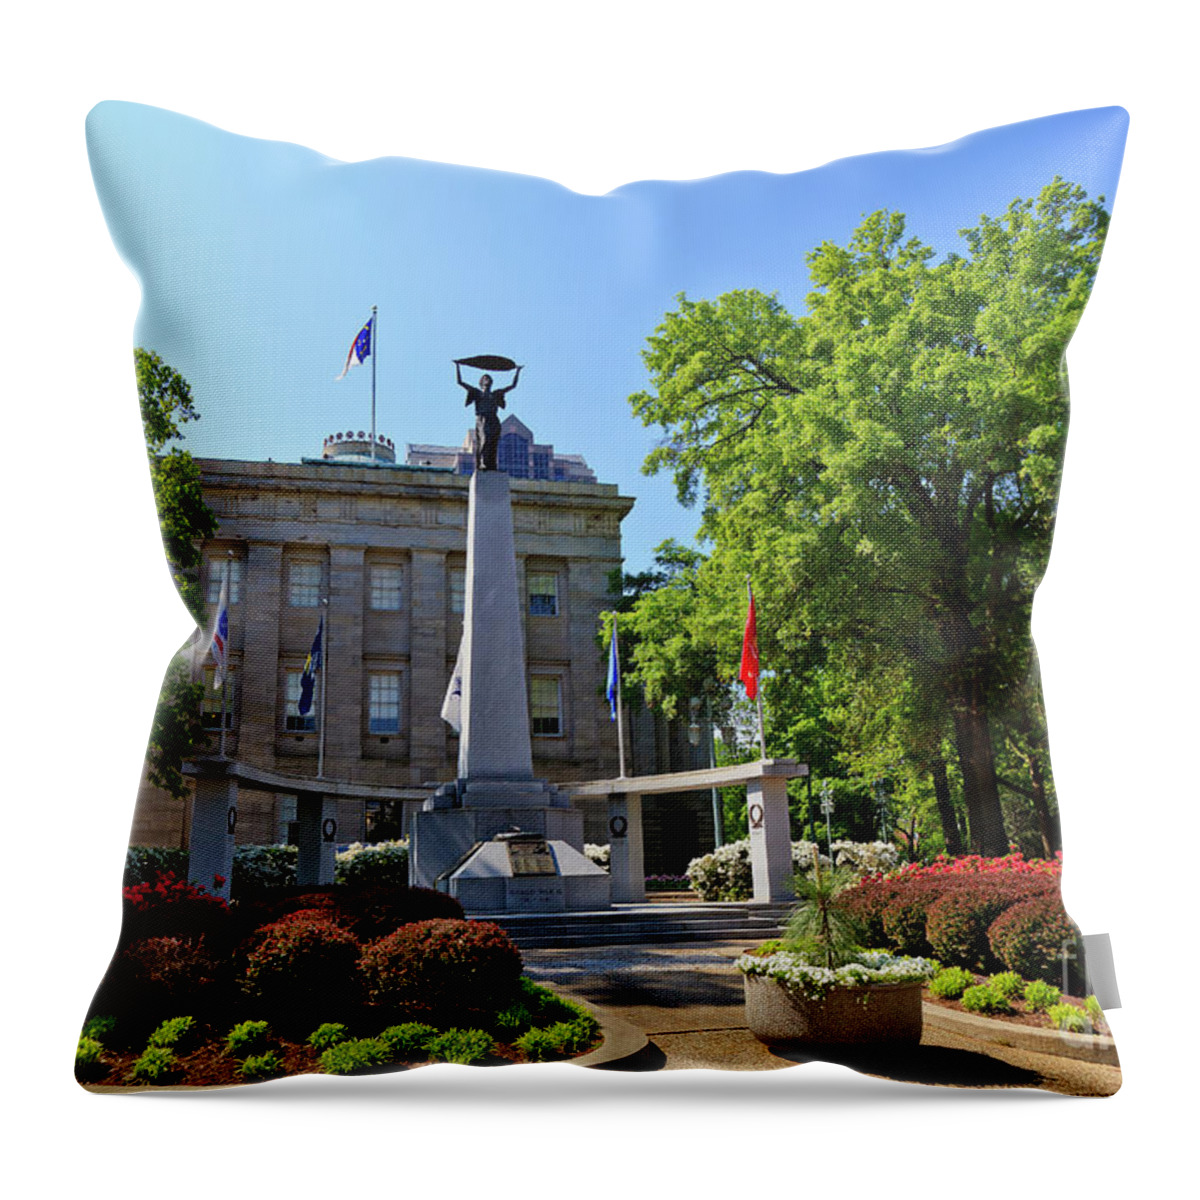 Raleigh Throw Pillow featuring the photograph Raleigh Veterans Monument by Jill Lang